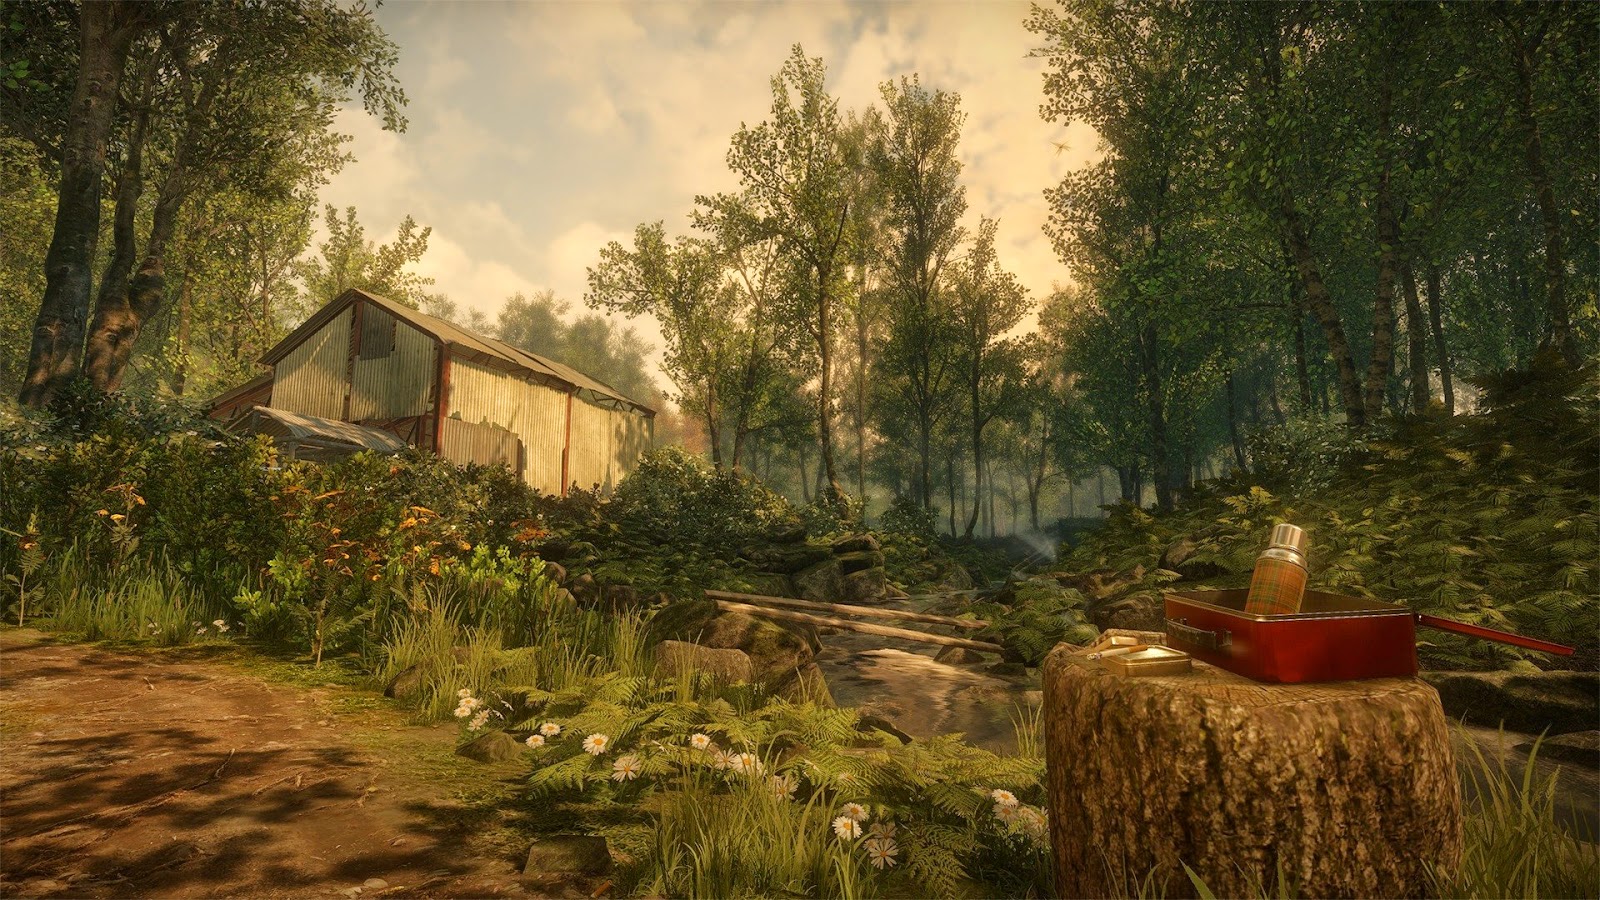 Screenshots de Everybody's Gone to the Rapture NÃO são photoshopadas! Everybodys-Gone-to-the-Rapture-GamesAddcition+(5)